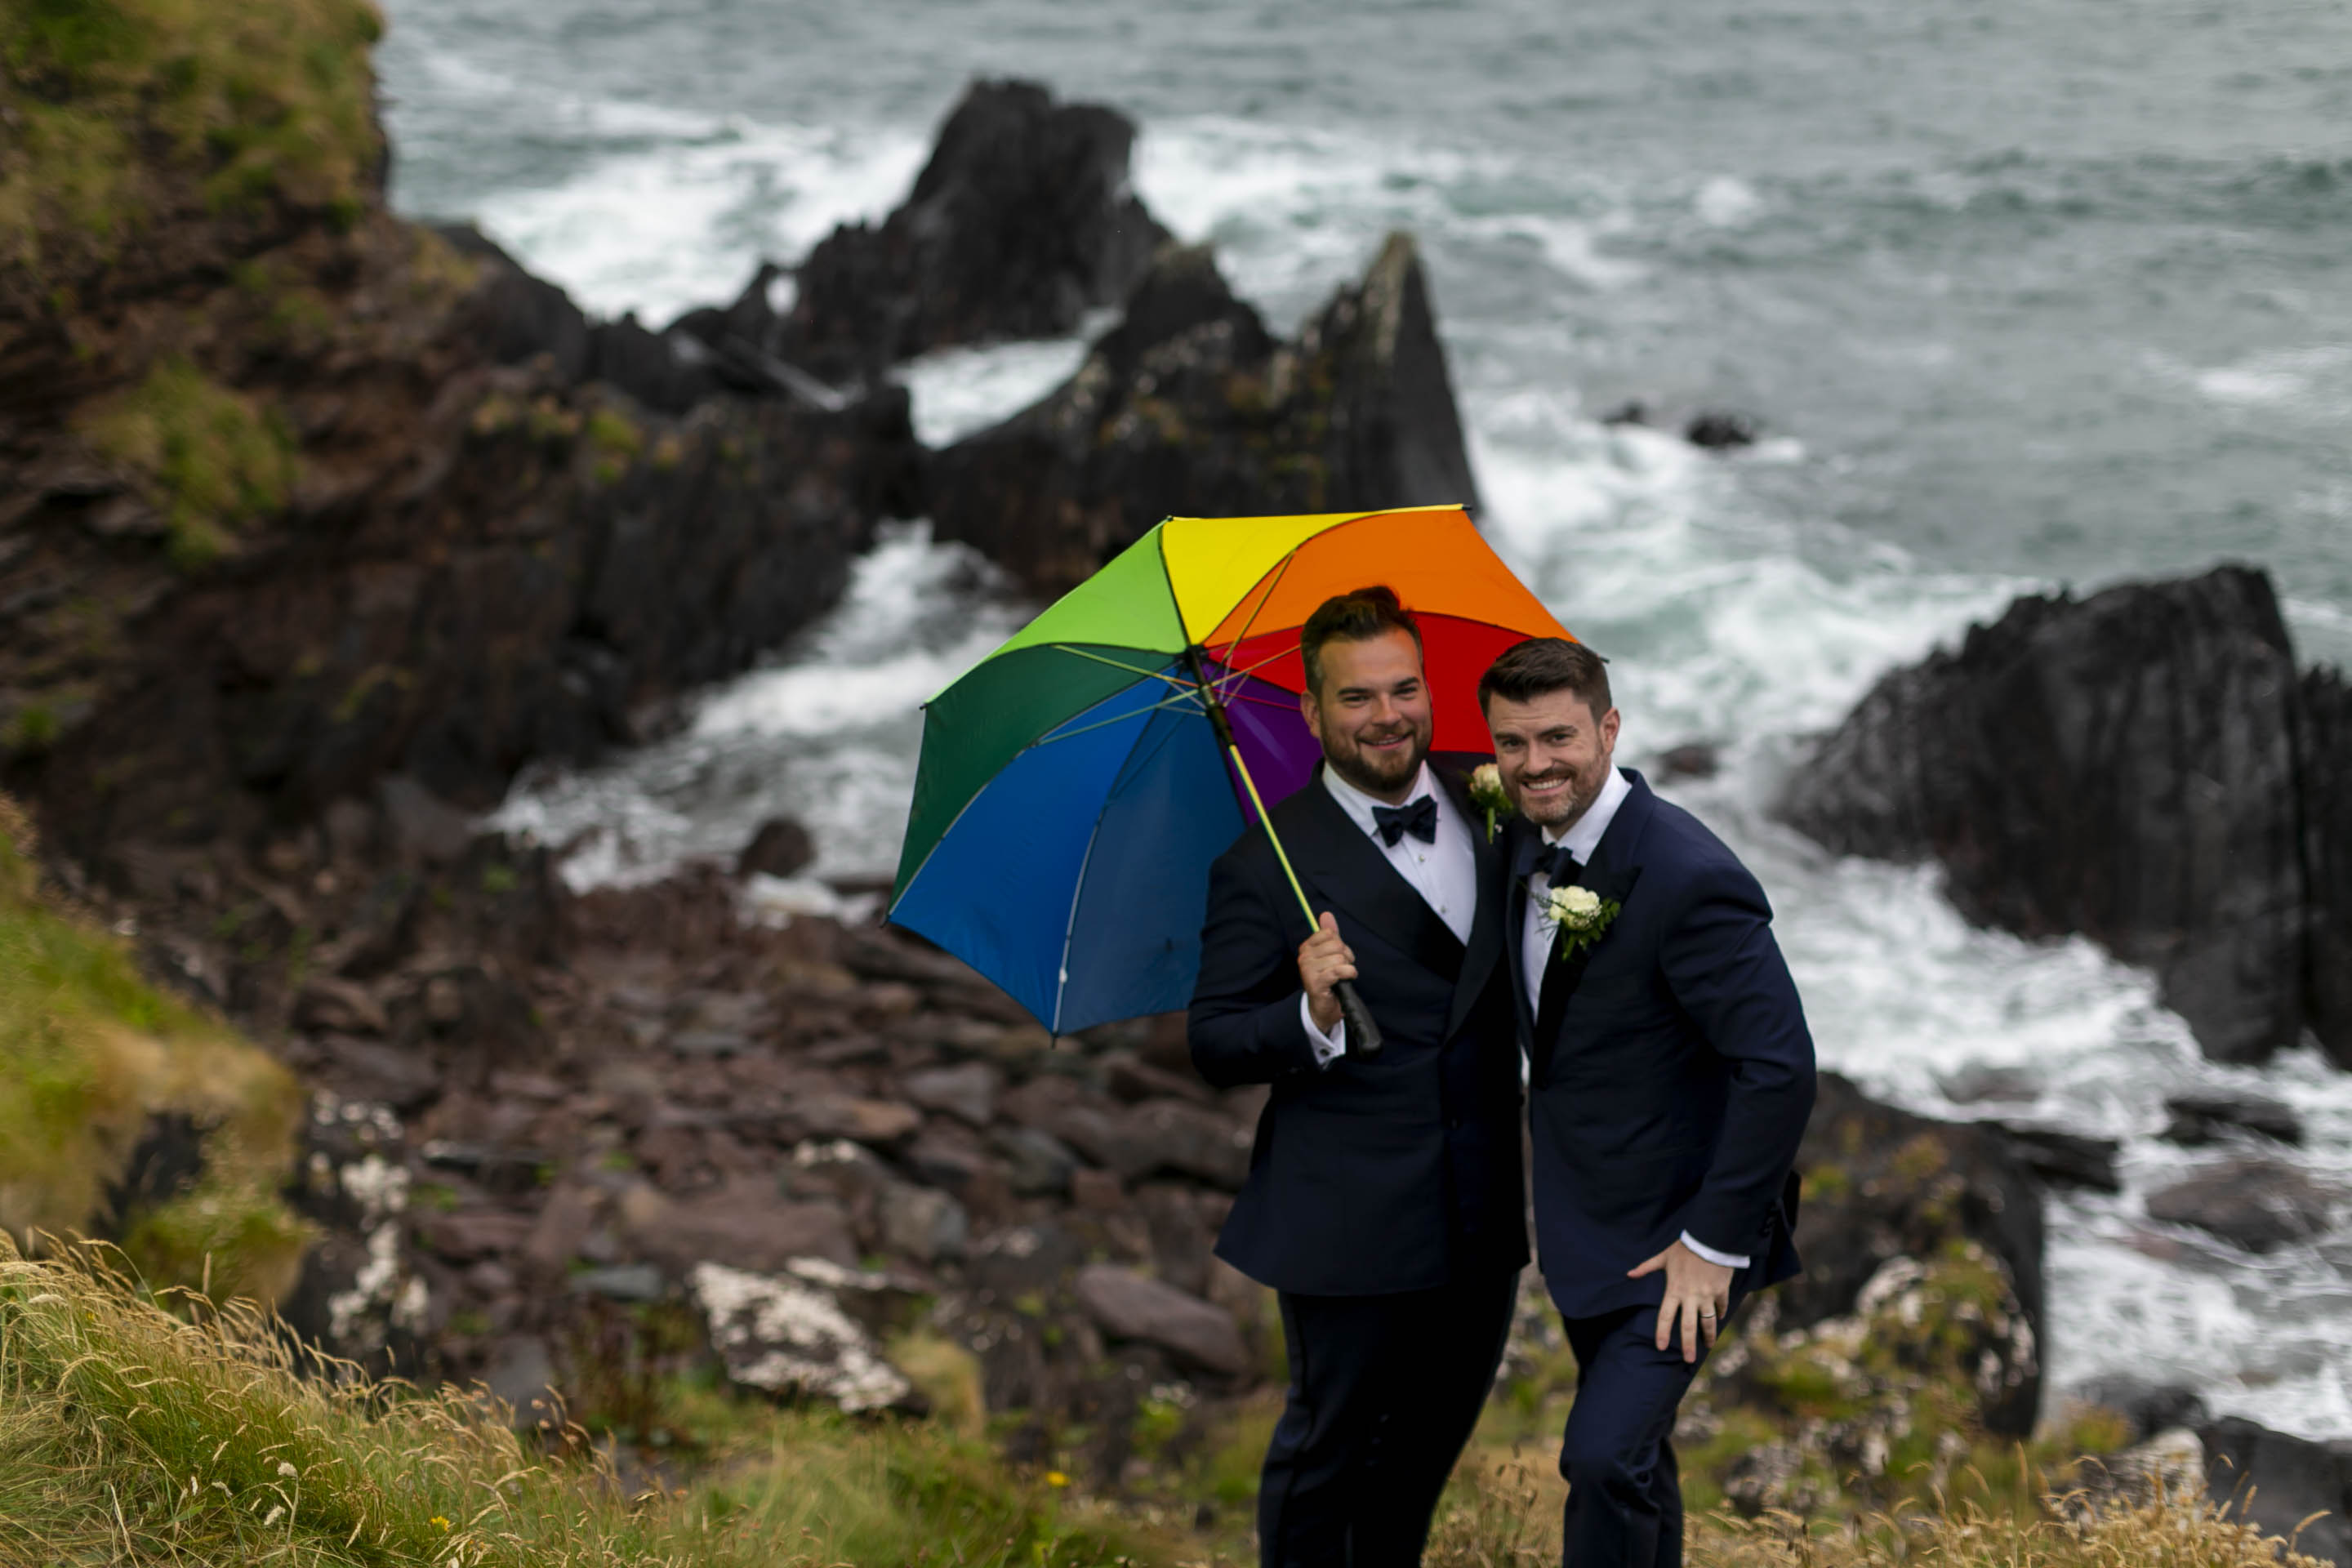 A dream day at the Dingle Skellig Hotel for Johnny and Michael 